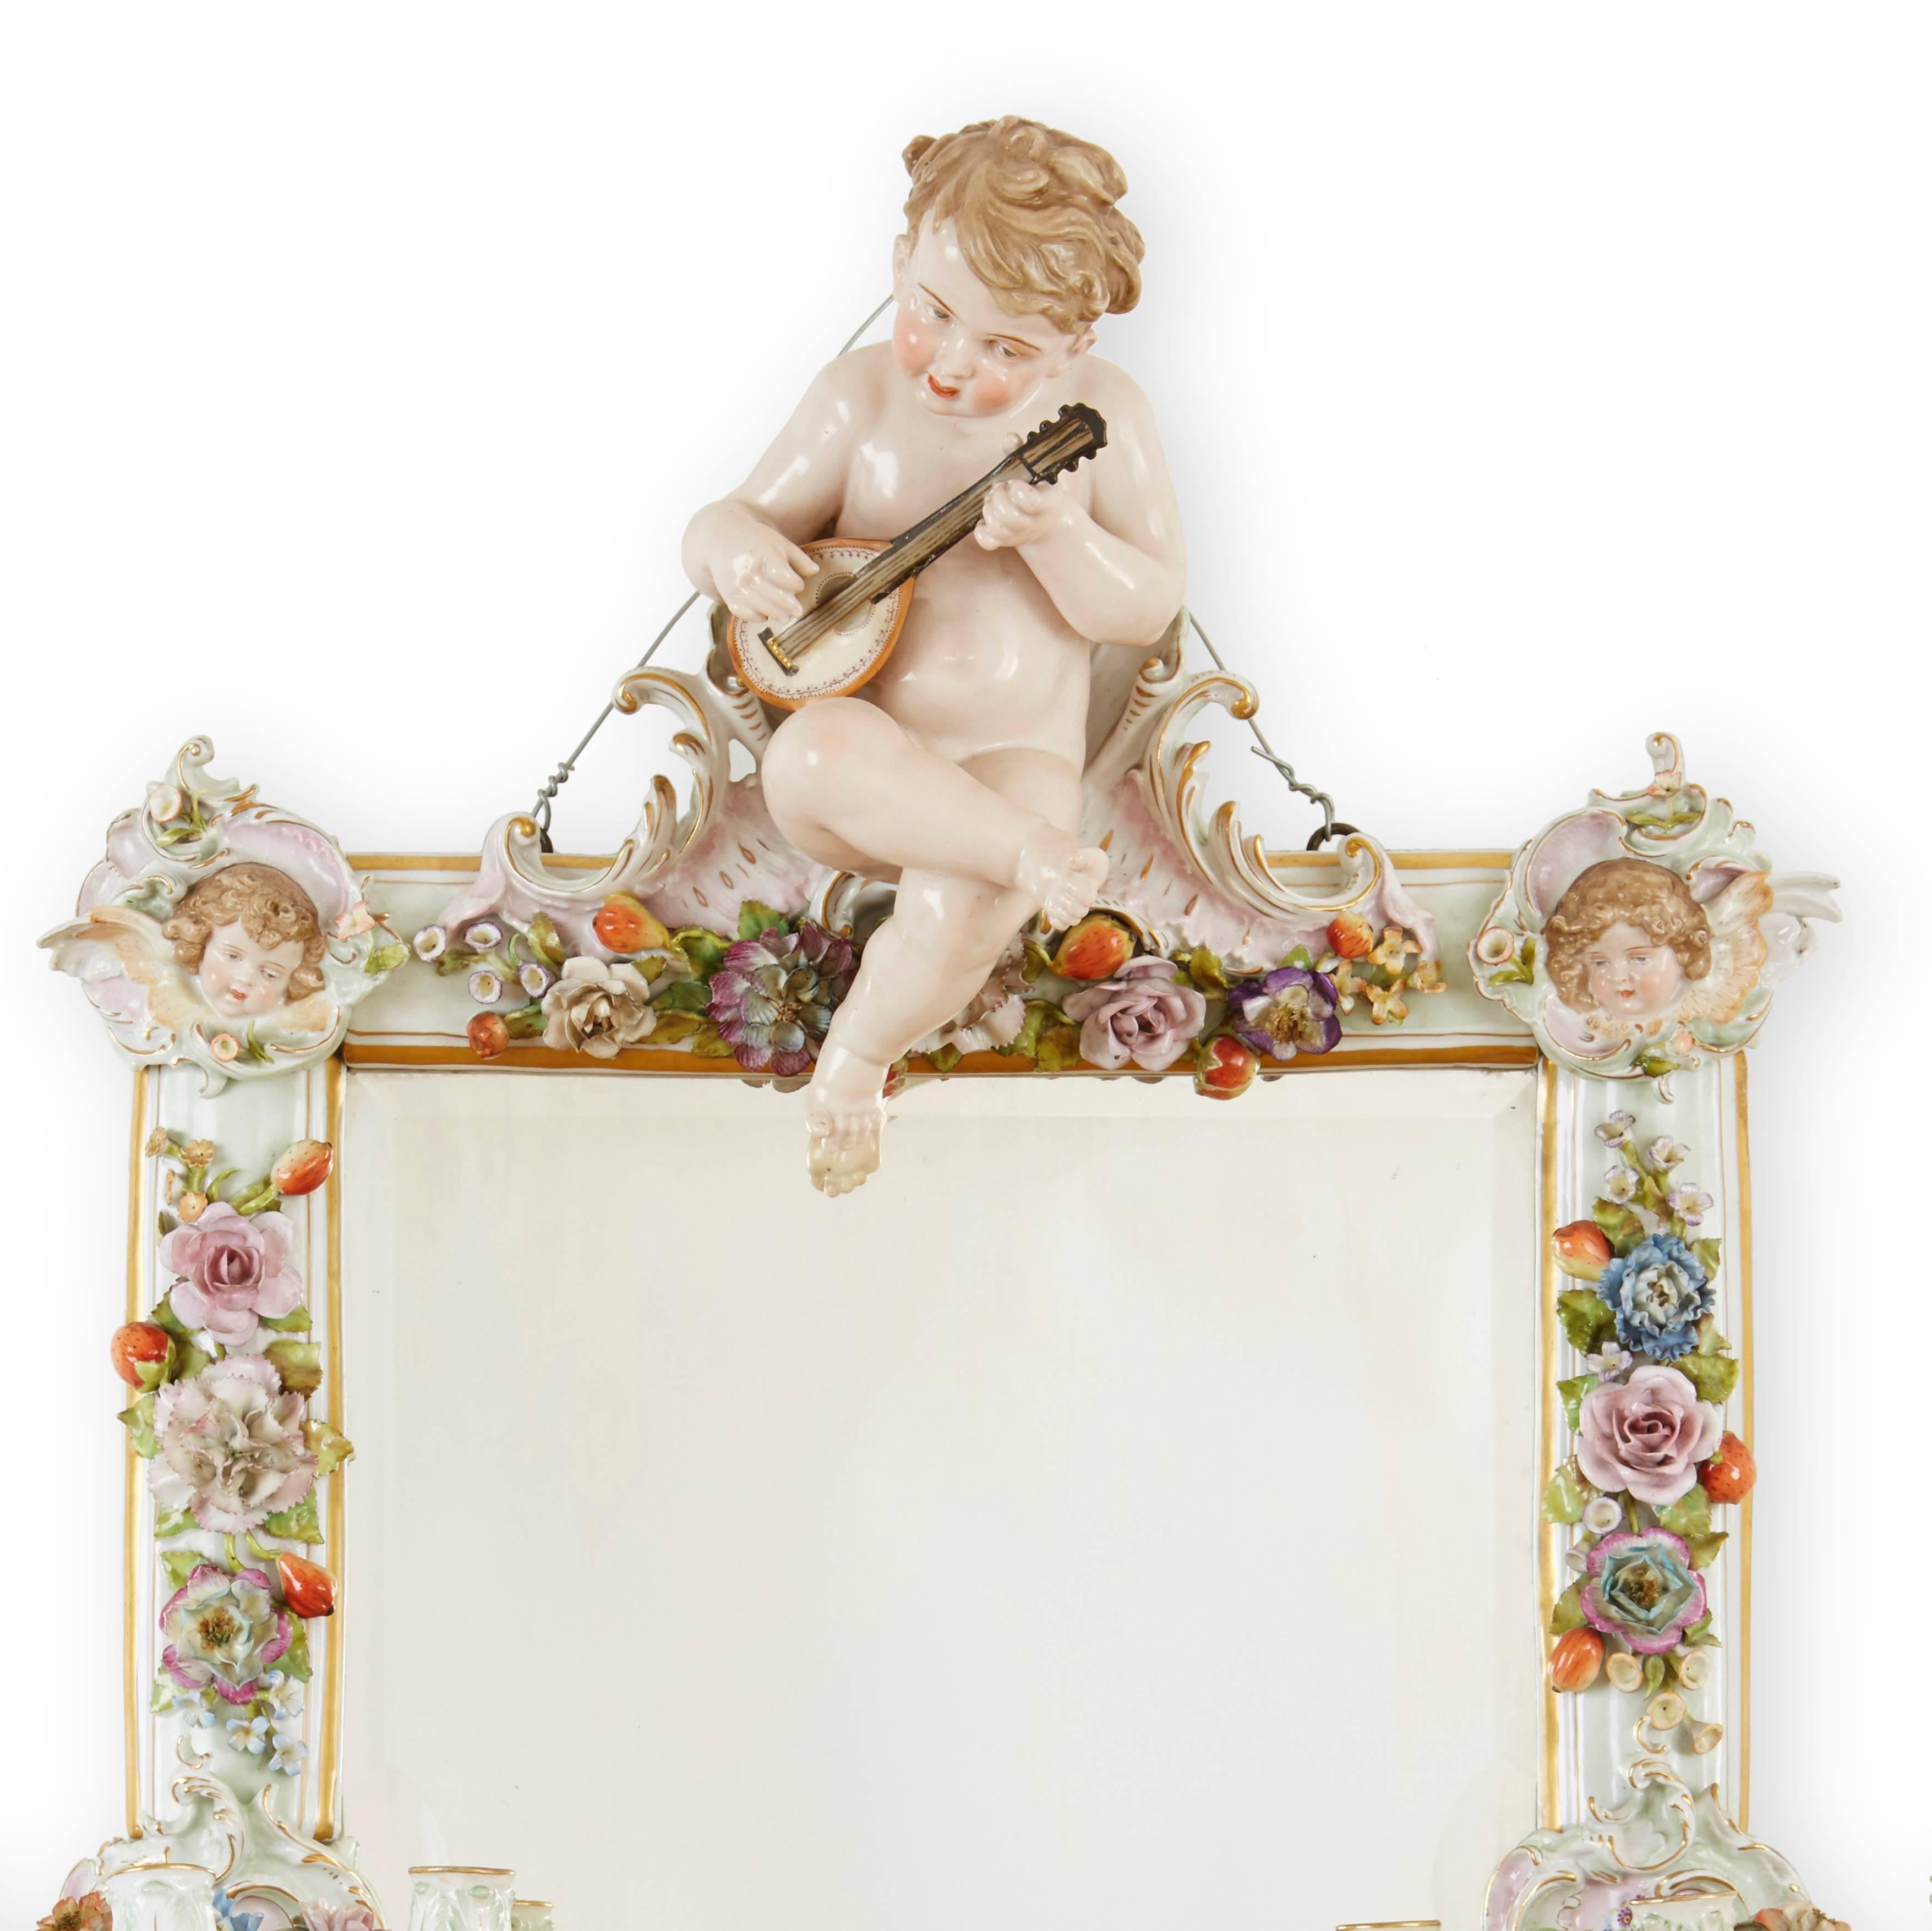 The rectangular plate surmounted by a cherub playing a mandolin above a frame with angel heads, flower heads and foliage. 

This elegant antique mirror is an excellent example of high quality Meissen porcelain work; even every flower petal is